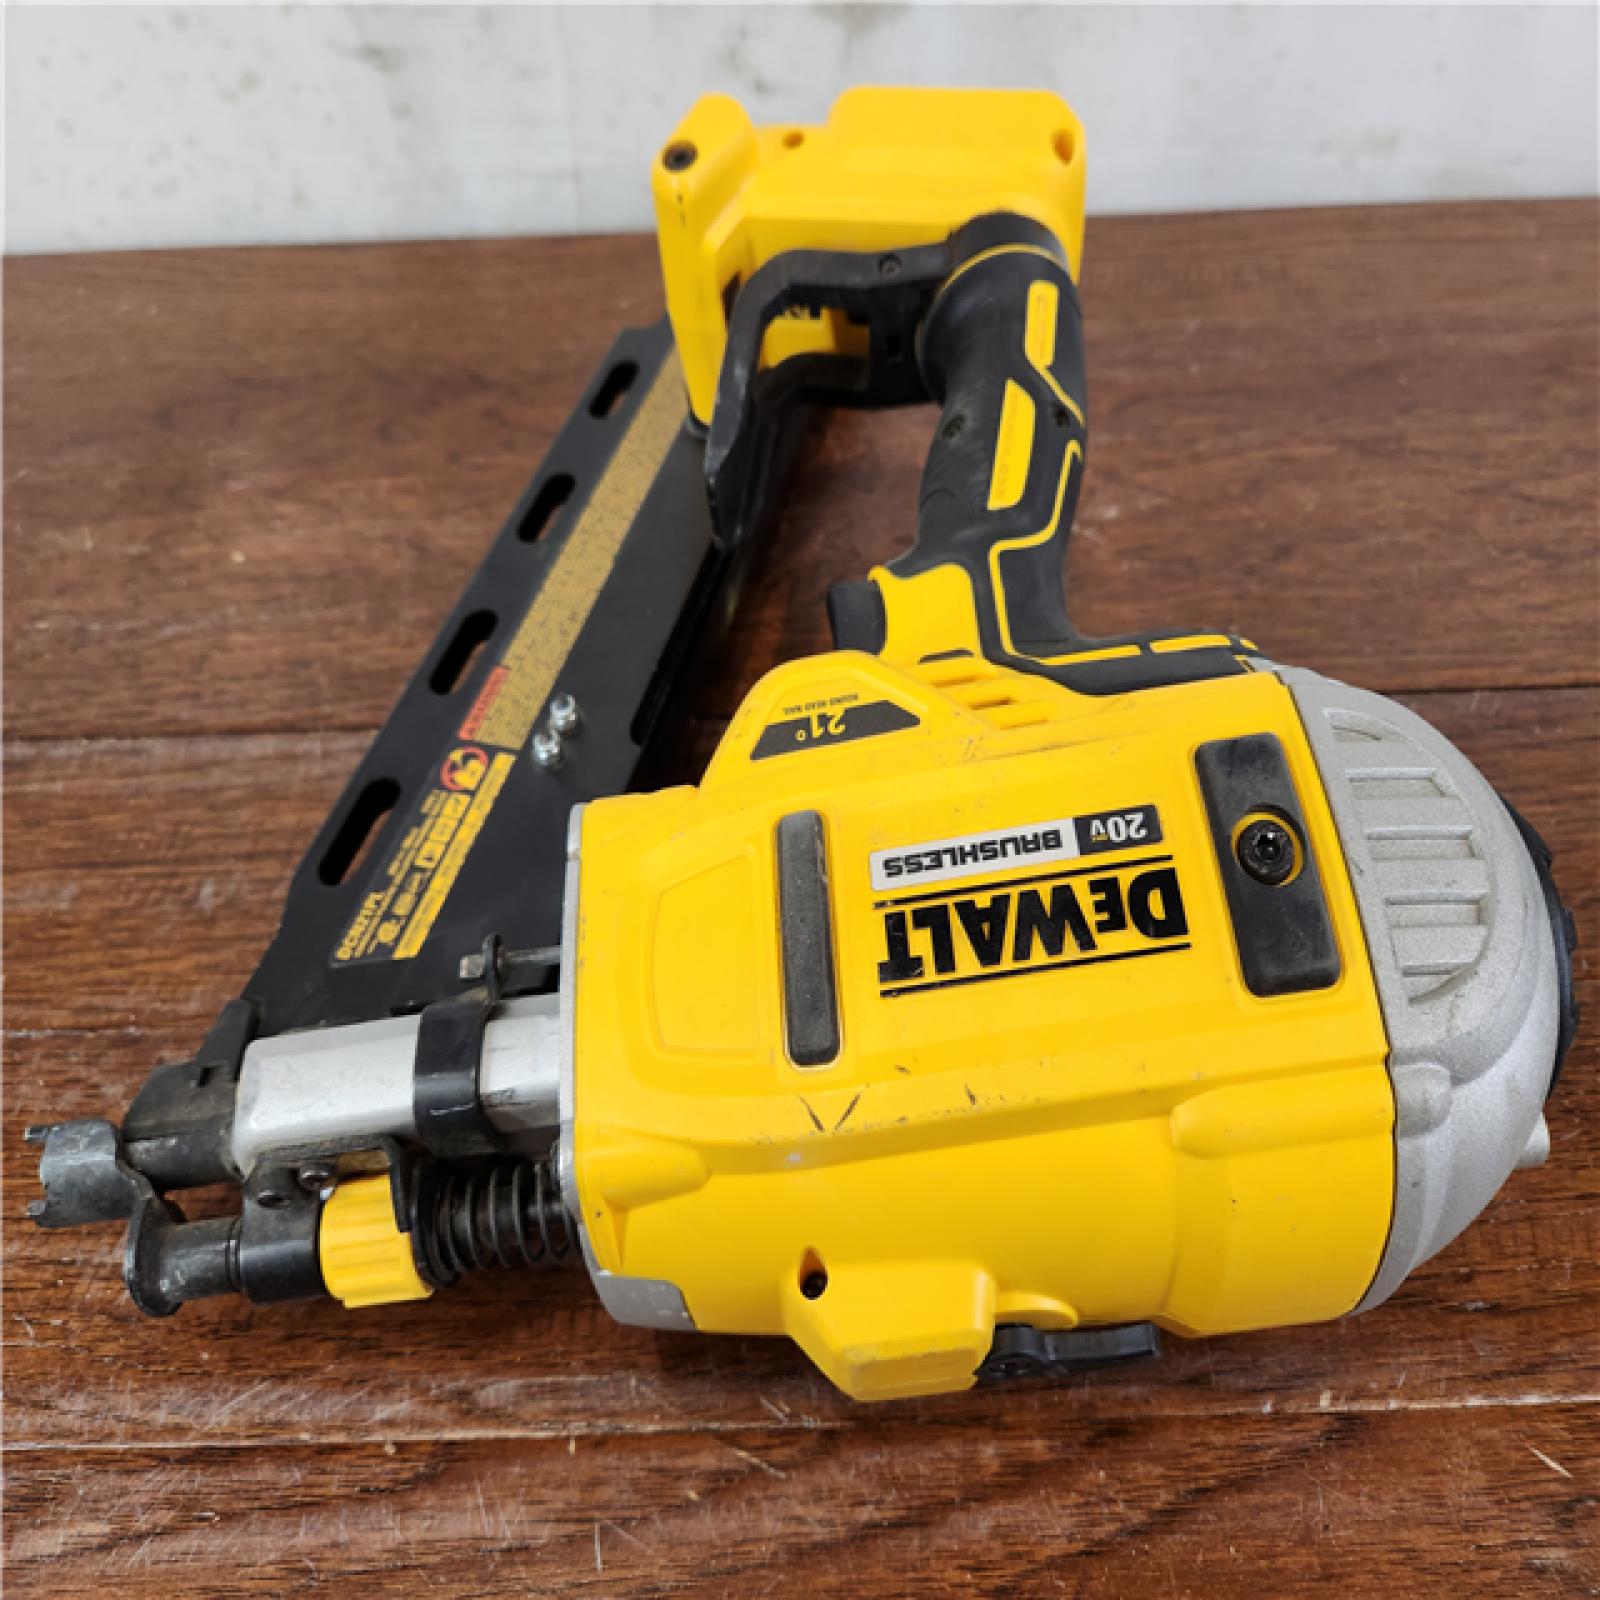 AS-IS DEWALT 20V MAX XR Brushless Cordless 2-Speed 21° Plastic Collated Framing Nailer (Tool Only)